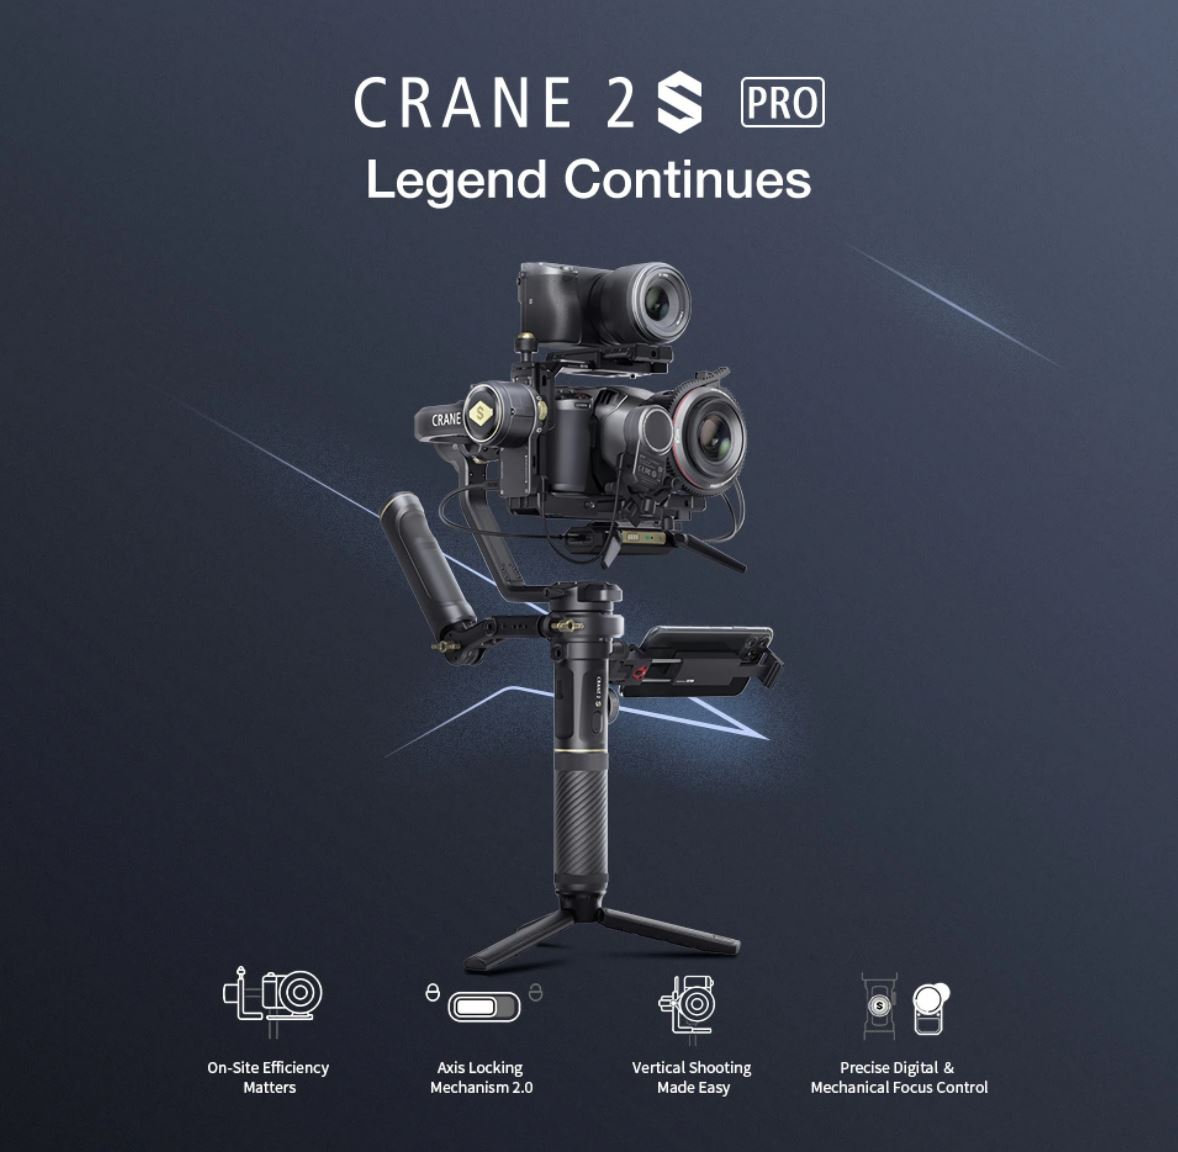 Zhiyun Crane 2S Pro Announced, Now includes all the gimbal accessories to upgrade your stabilized shooting experience